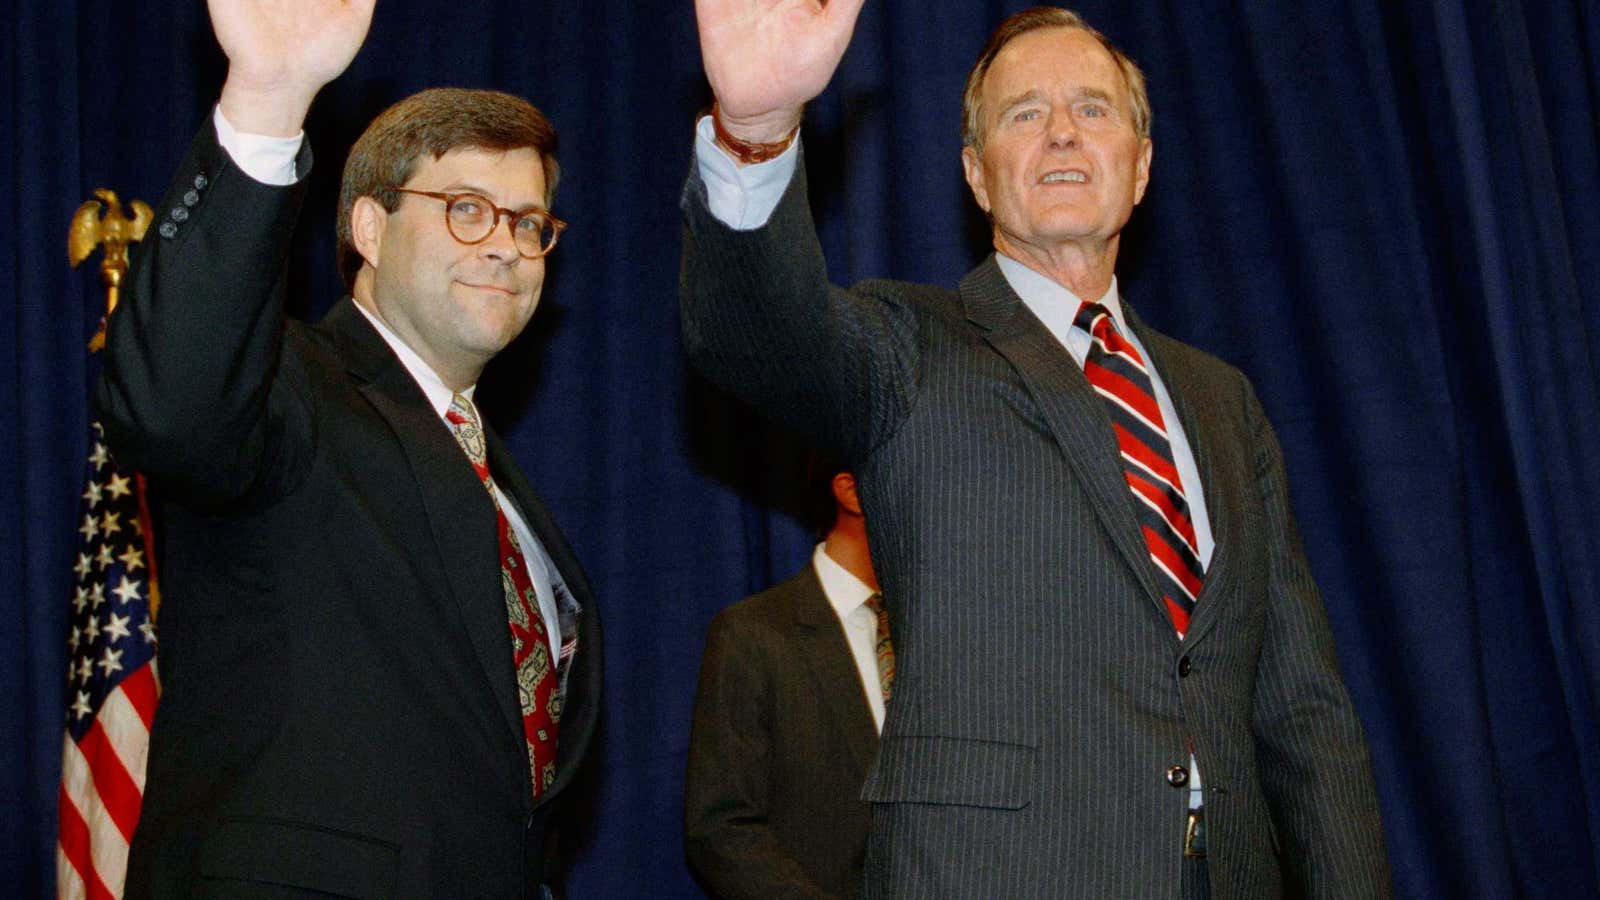 Barr served as Bush Sr.’s AG from 1991 to 1993.